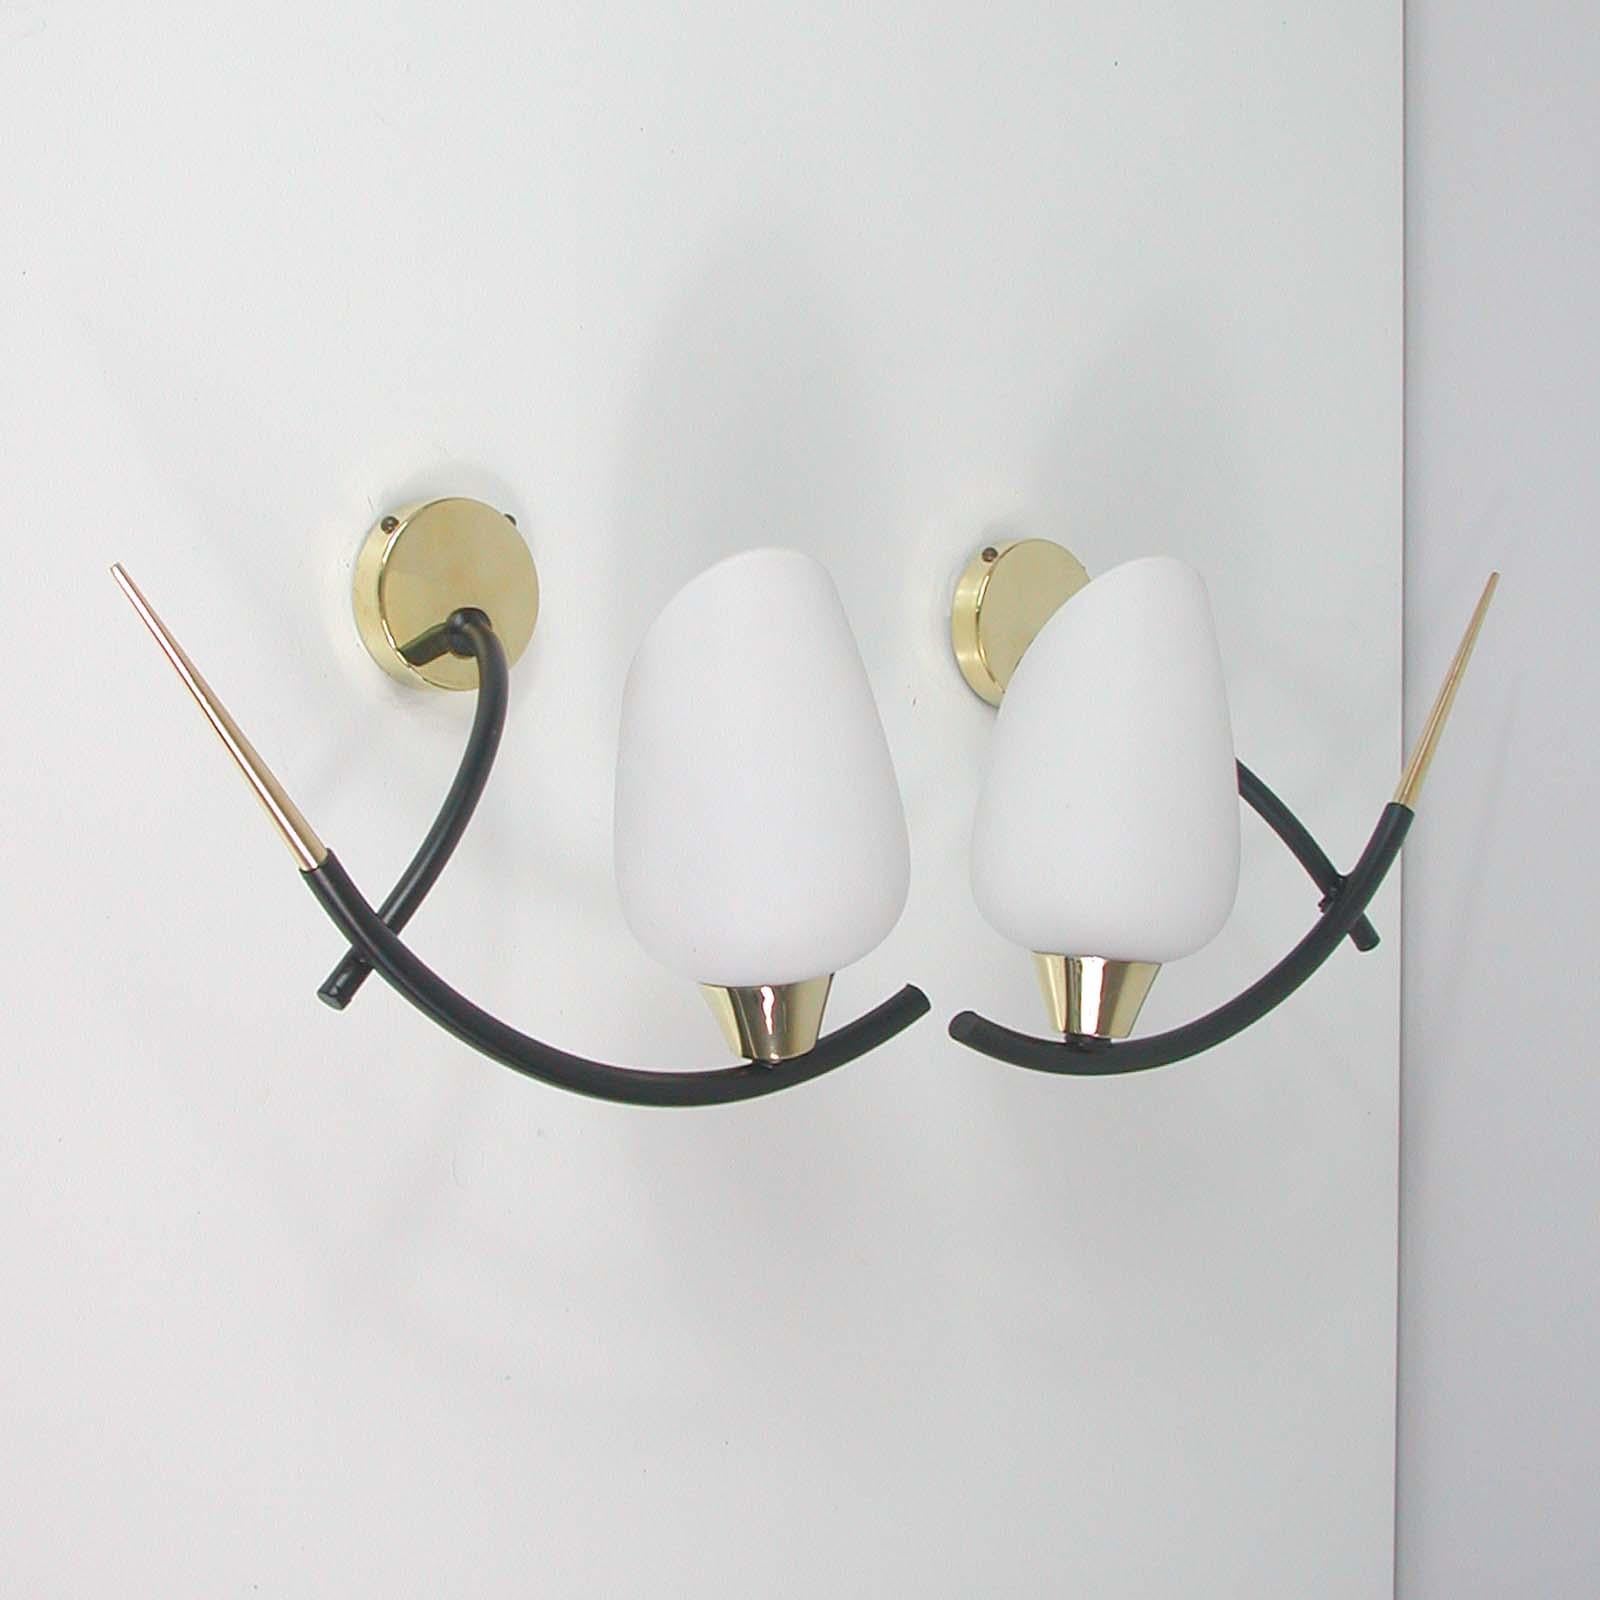 Midcentury French Brass & Opaline Glass Sconces by Maison Arlus, 1950s For Sale 10